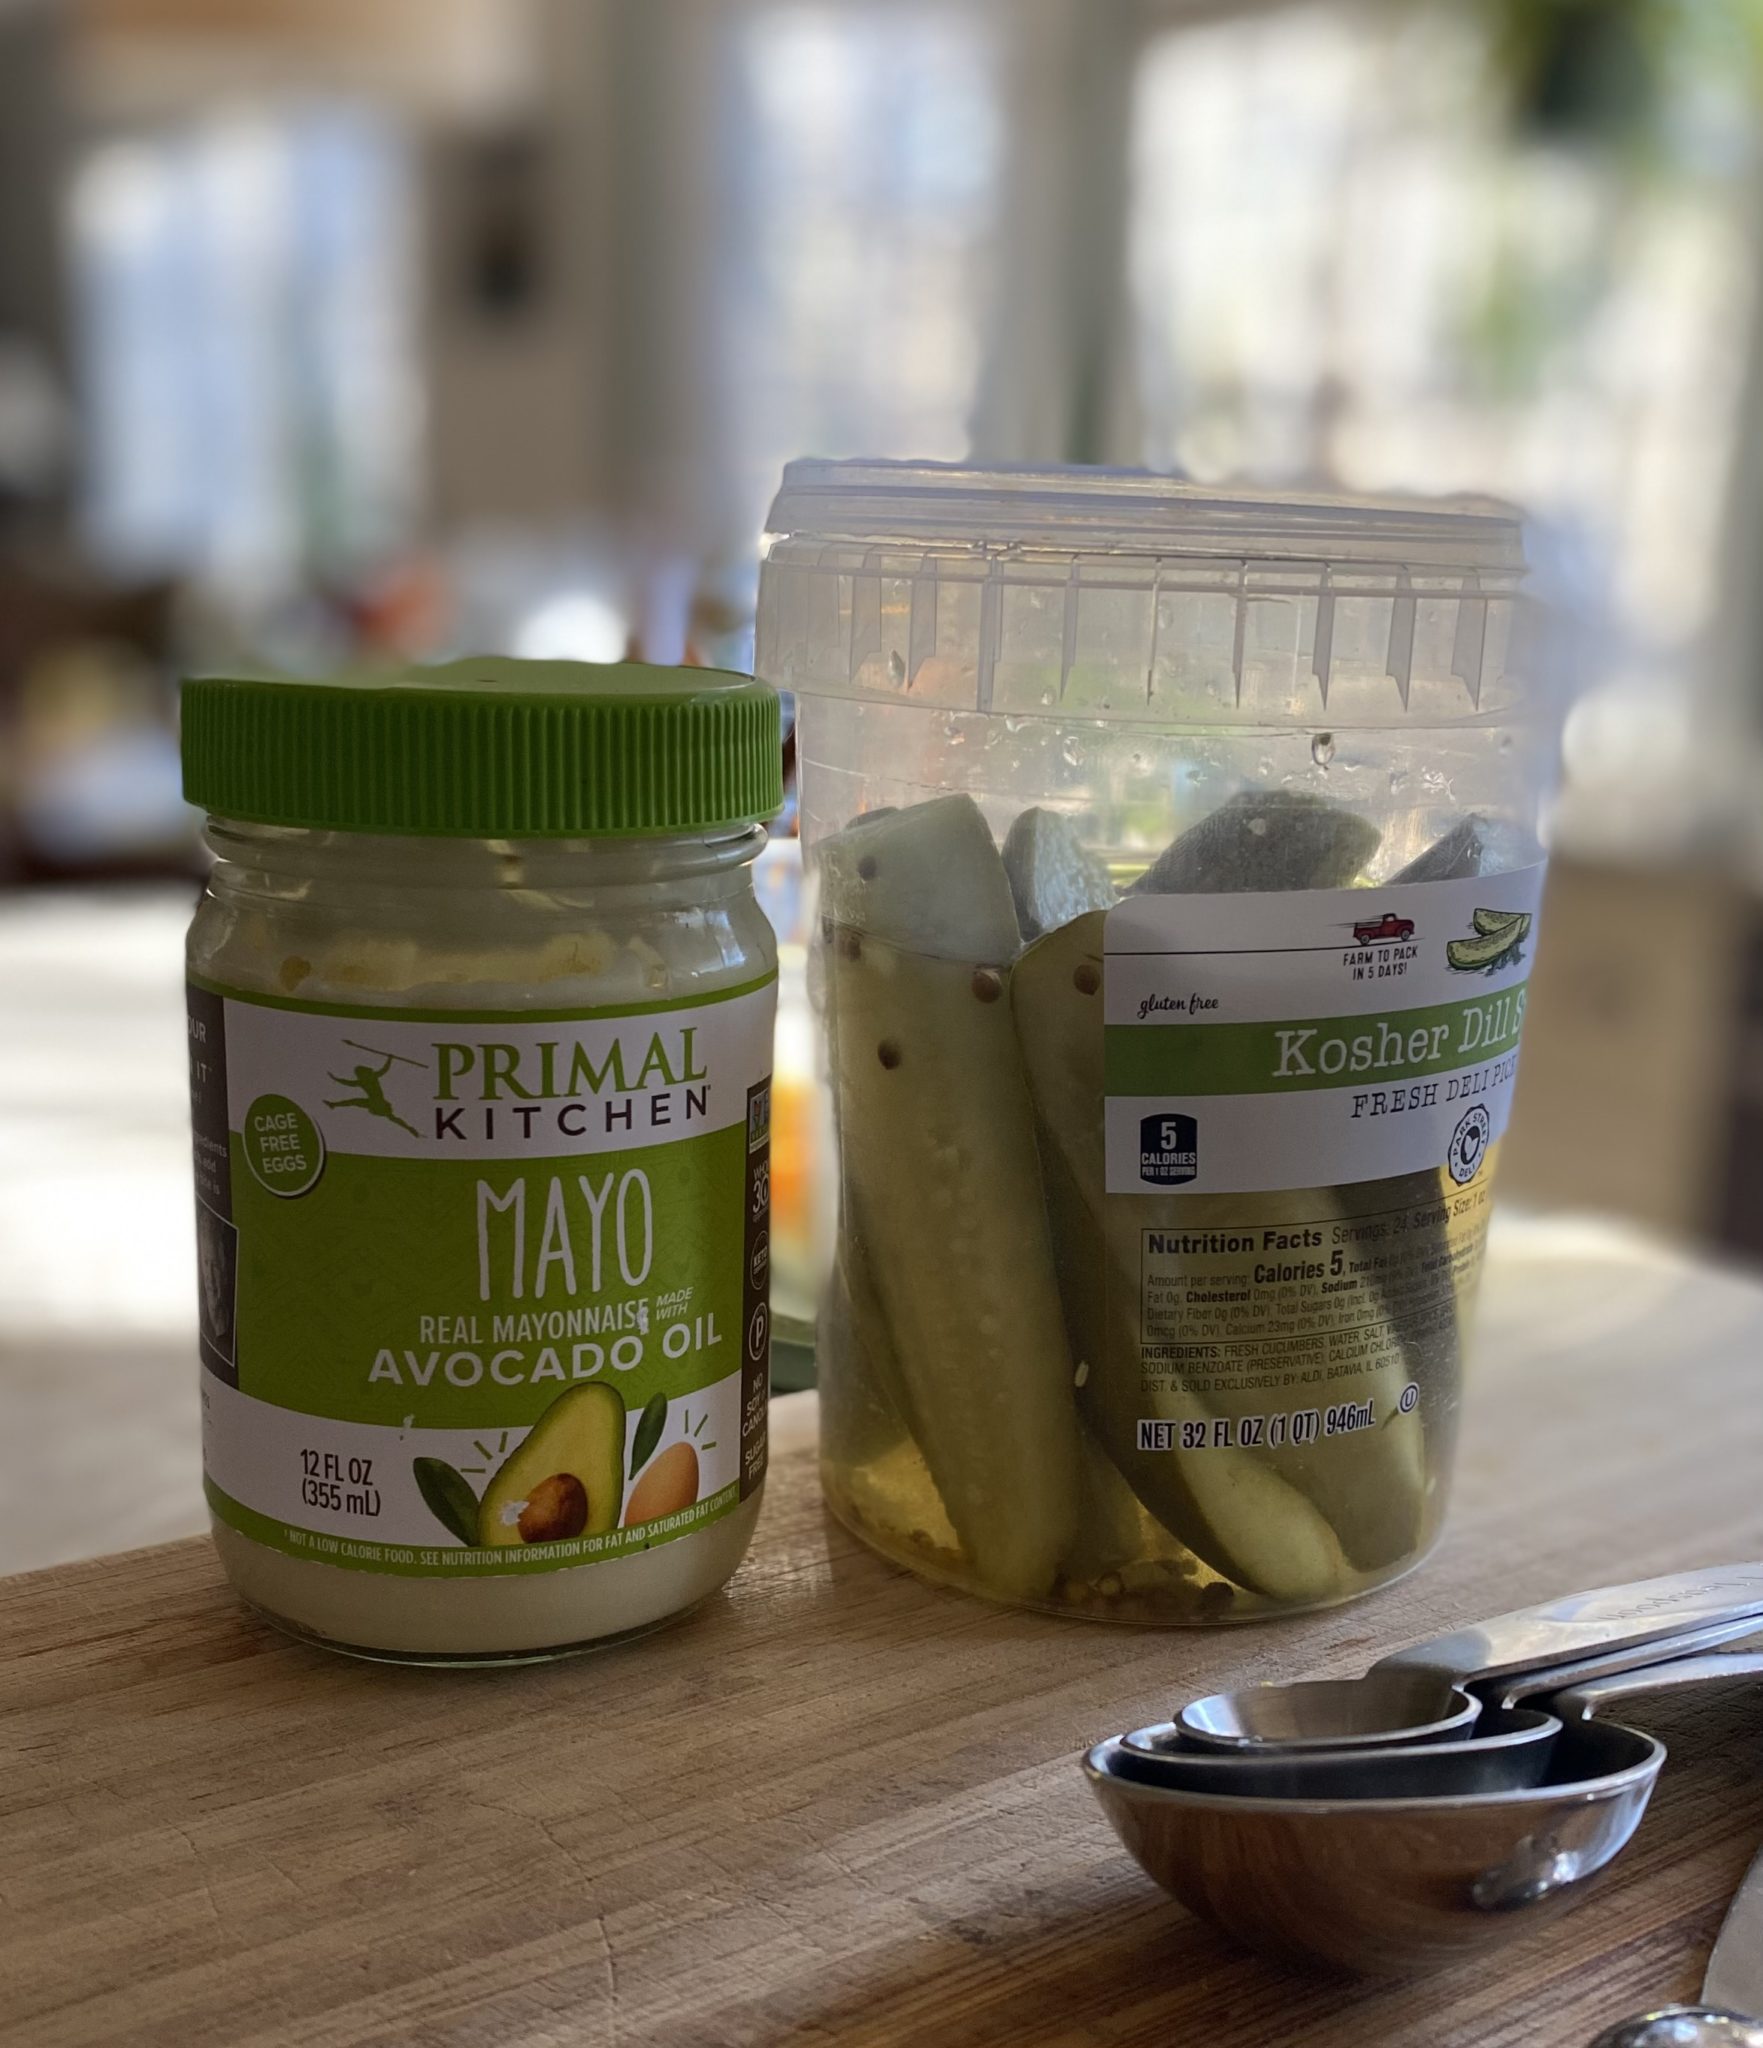 A jar of Primal Kitchen mayonnaise and a jar of dill pickles on a kitchen countertop.